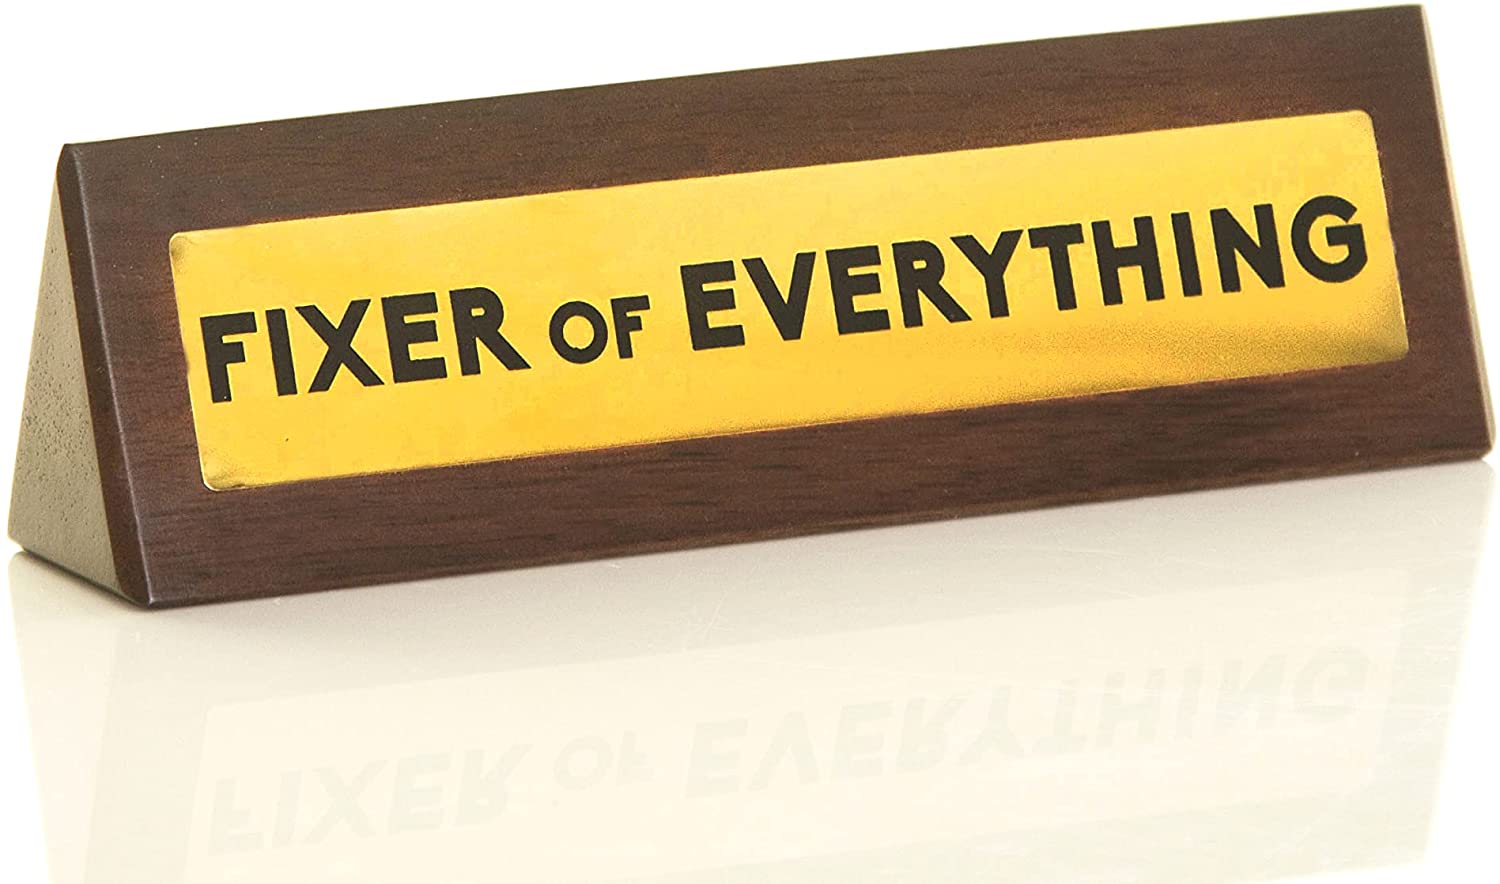 'Fixer of Everything' Desk Sign